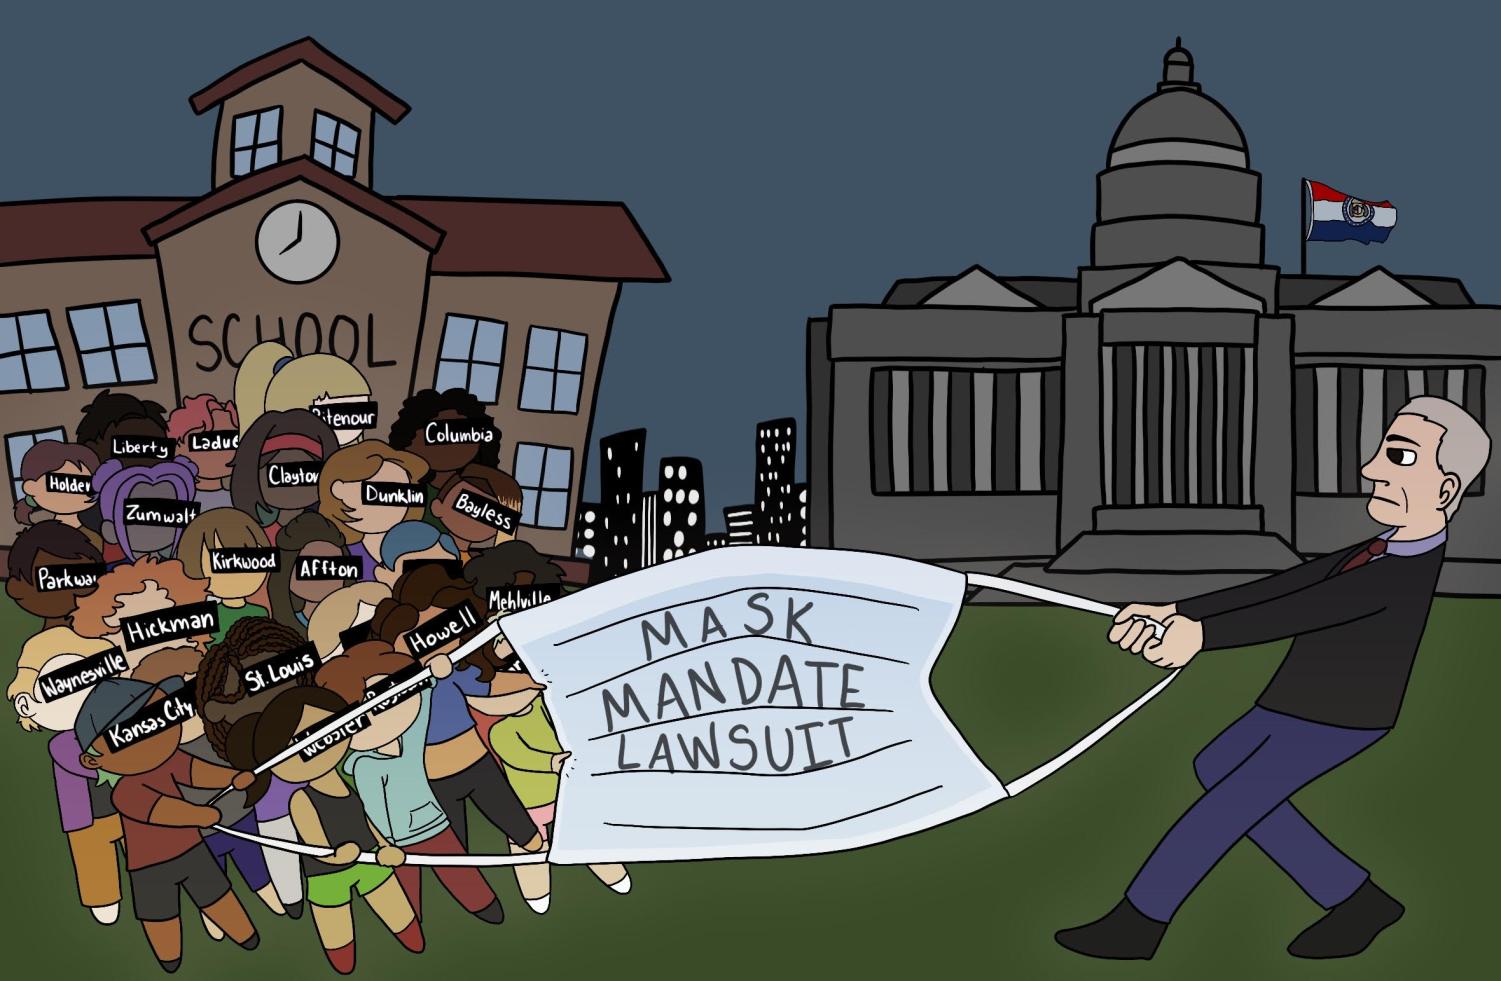 School districts around the state battle with the Missouri Attorney General over school mask mandates. Here, the schools and Attorney General are having a tug-of-war over a mask with a school and the Missouri Capitol building in the background.